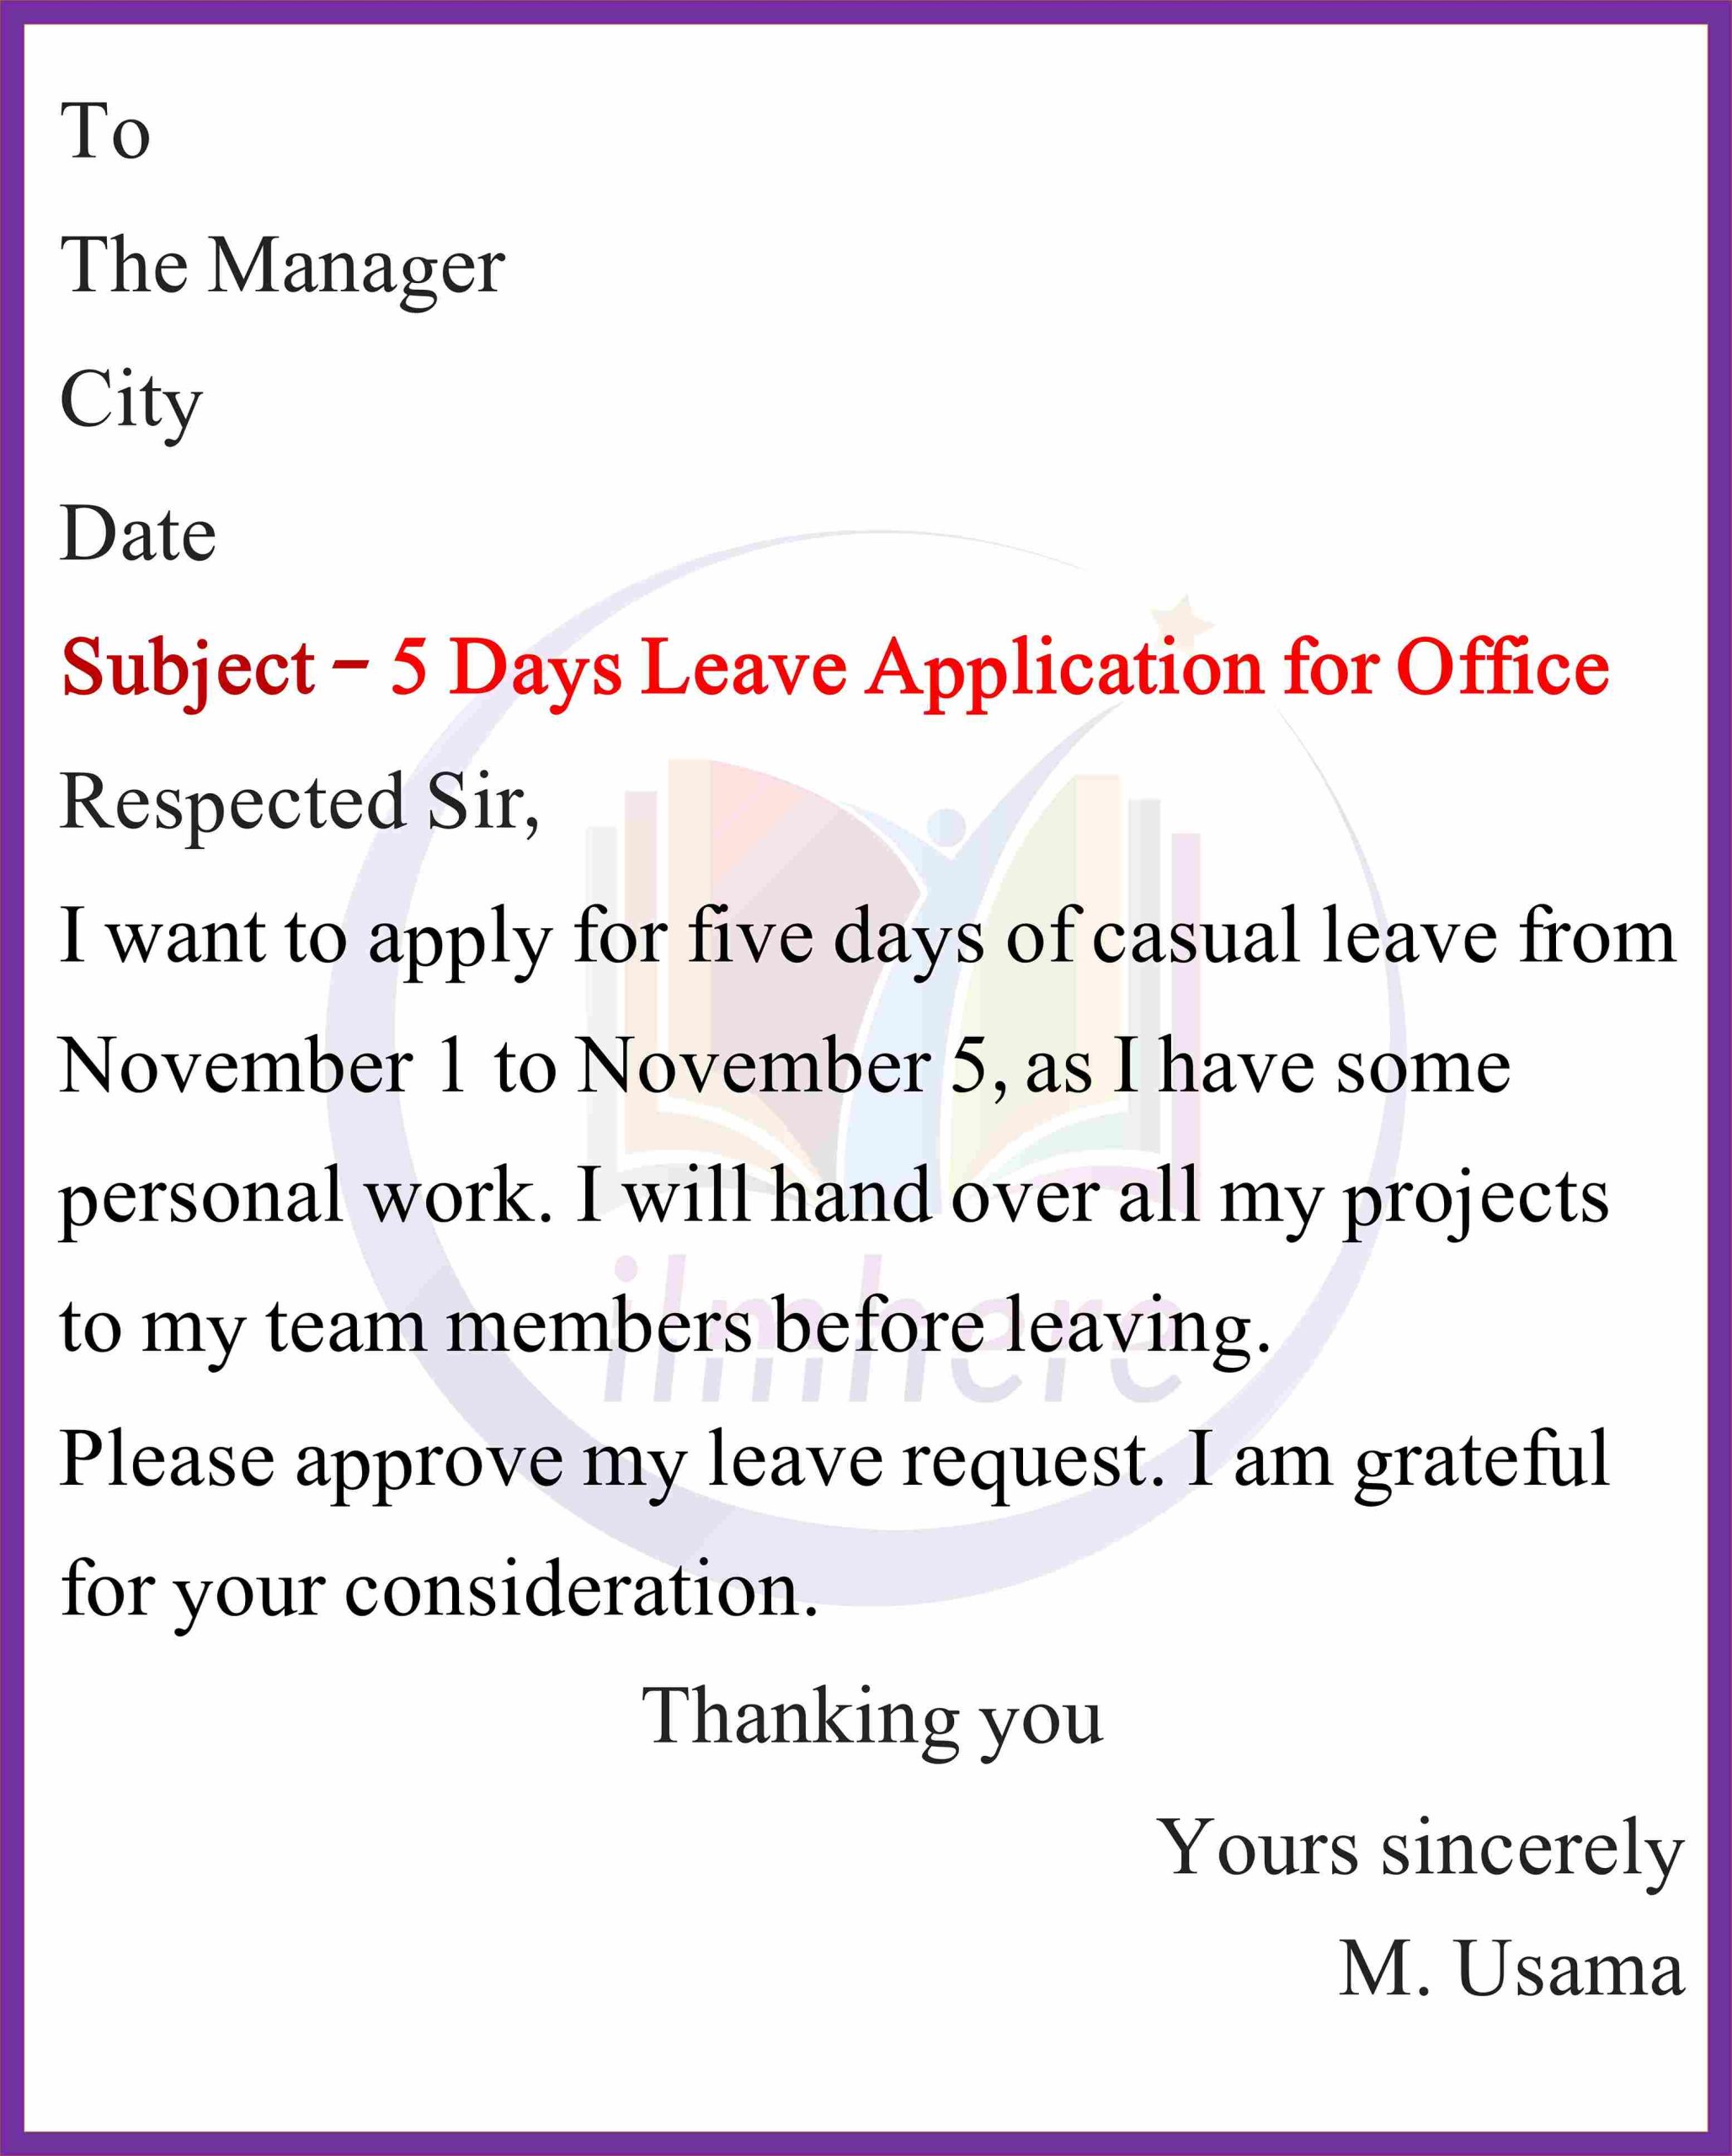 5 Days Leave Application for Office 